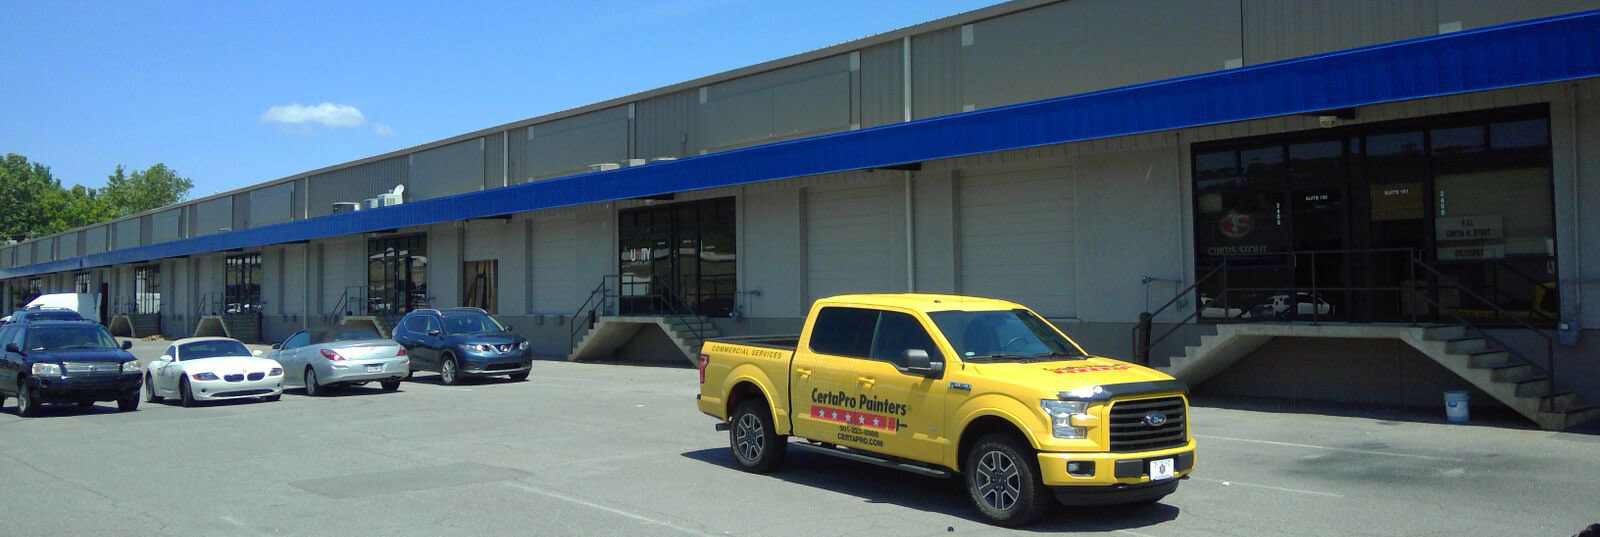 Commercial Retail and Warehouse painting by CertaPro Painters of Little Rock, AR